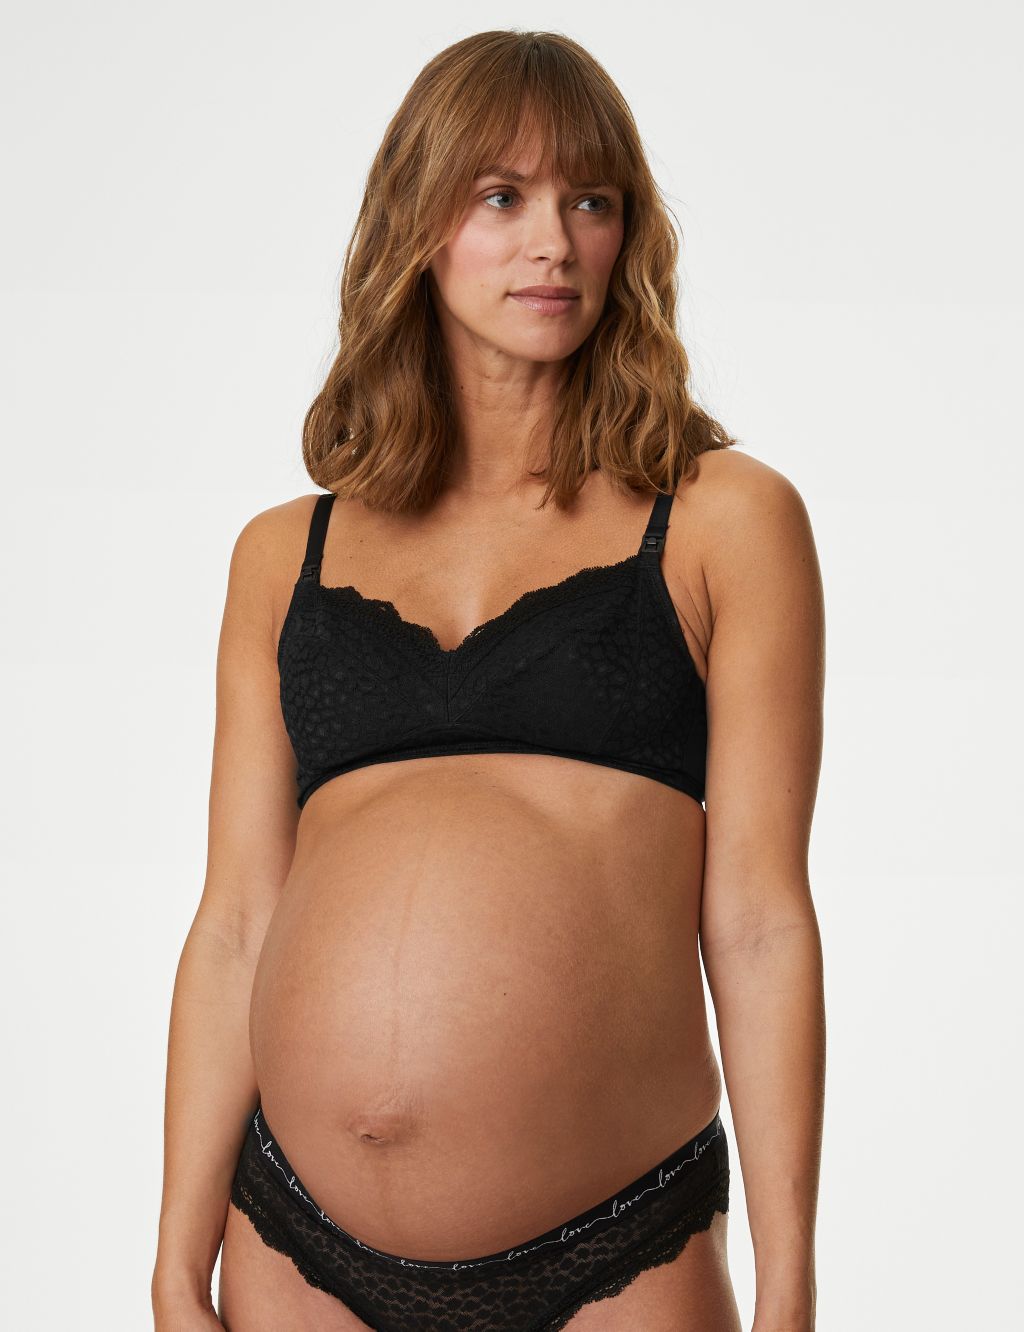 Comfortable and Confidence-Boosting Nursing Bras That Mums Love